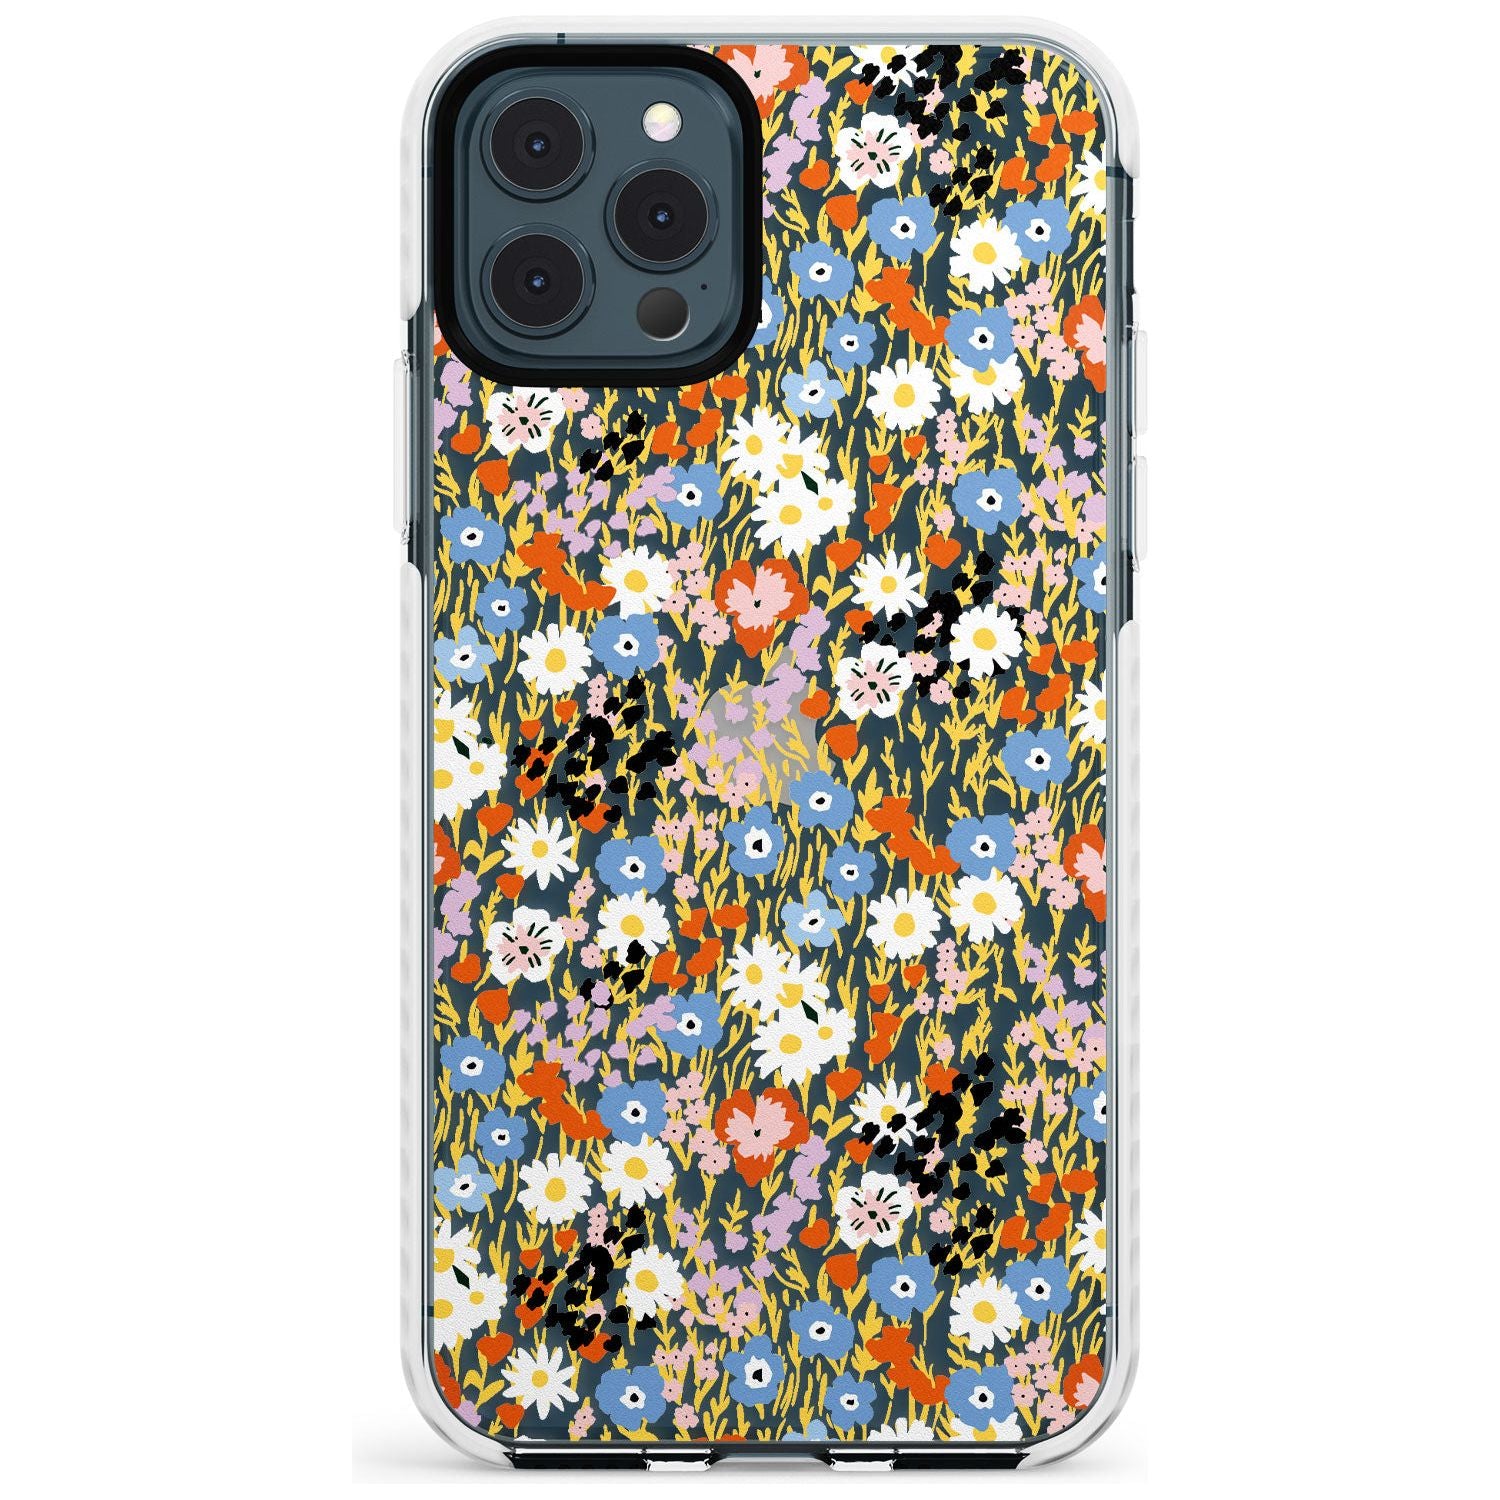 Busy Floral Mix: Transparent Slim TPU Phone Case for iPhone 11 Pro Max